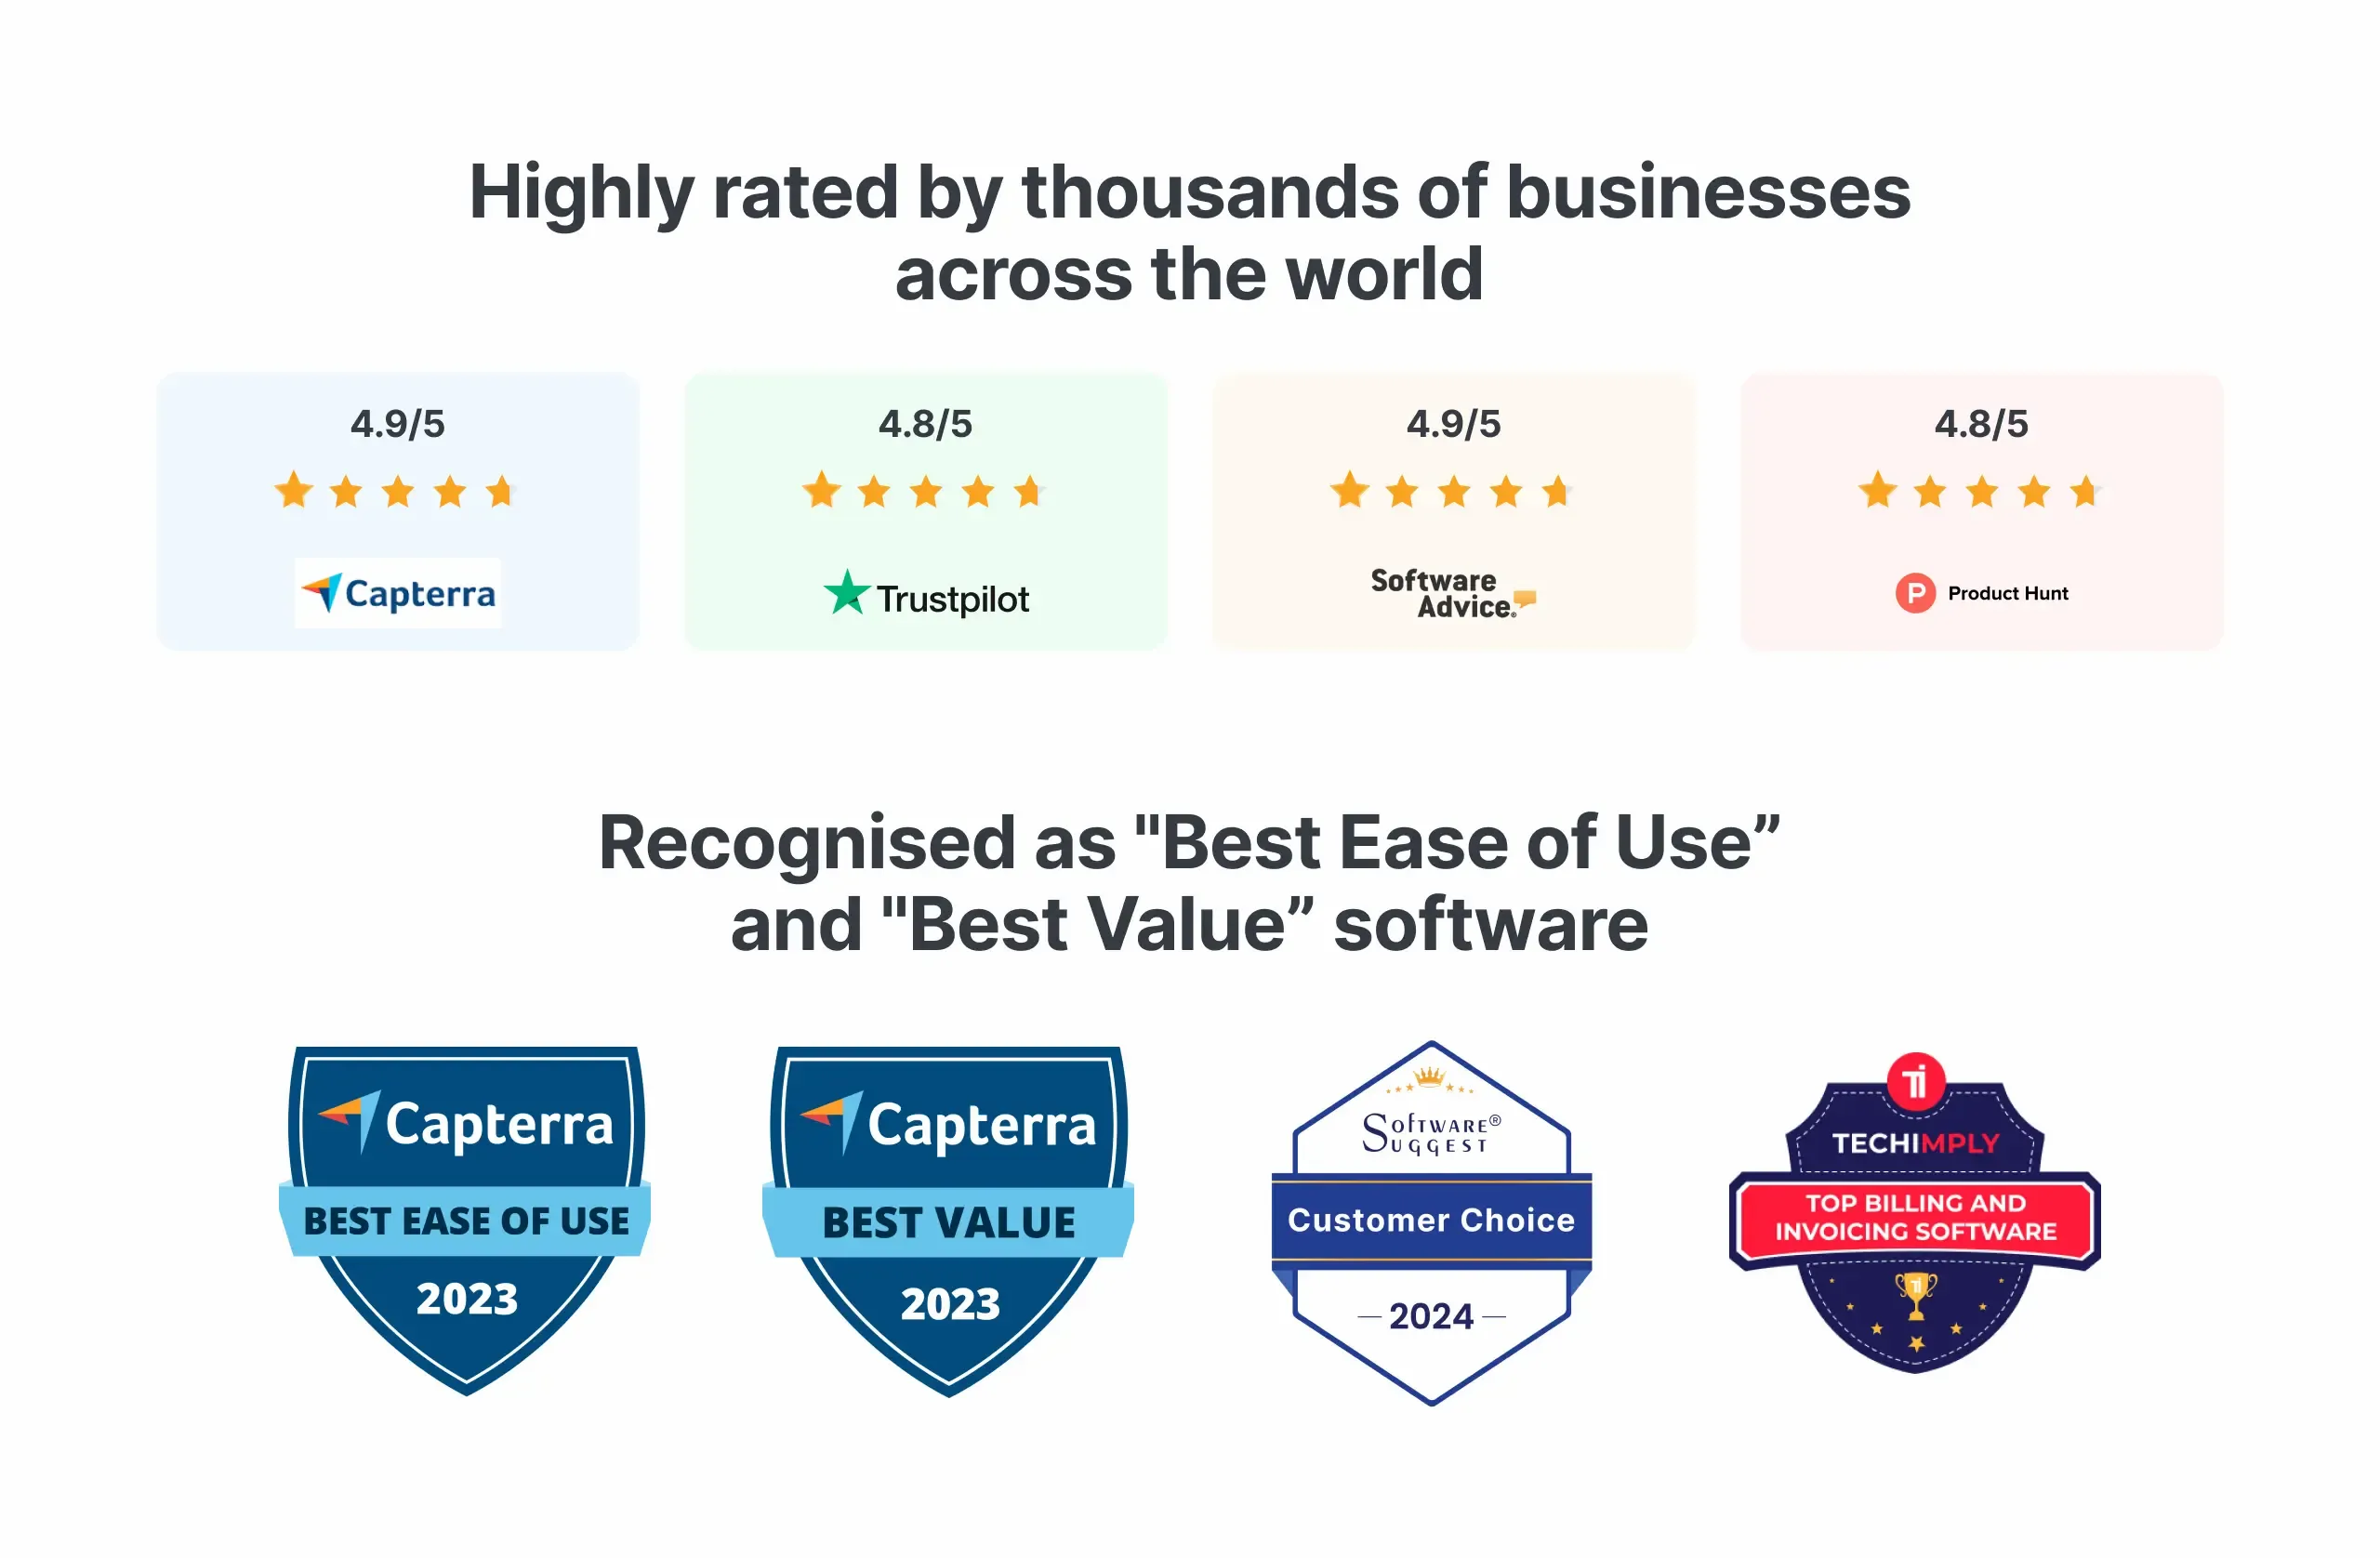 Online Invoicing Software - Refrens Ratings